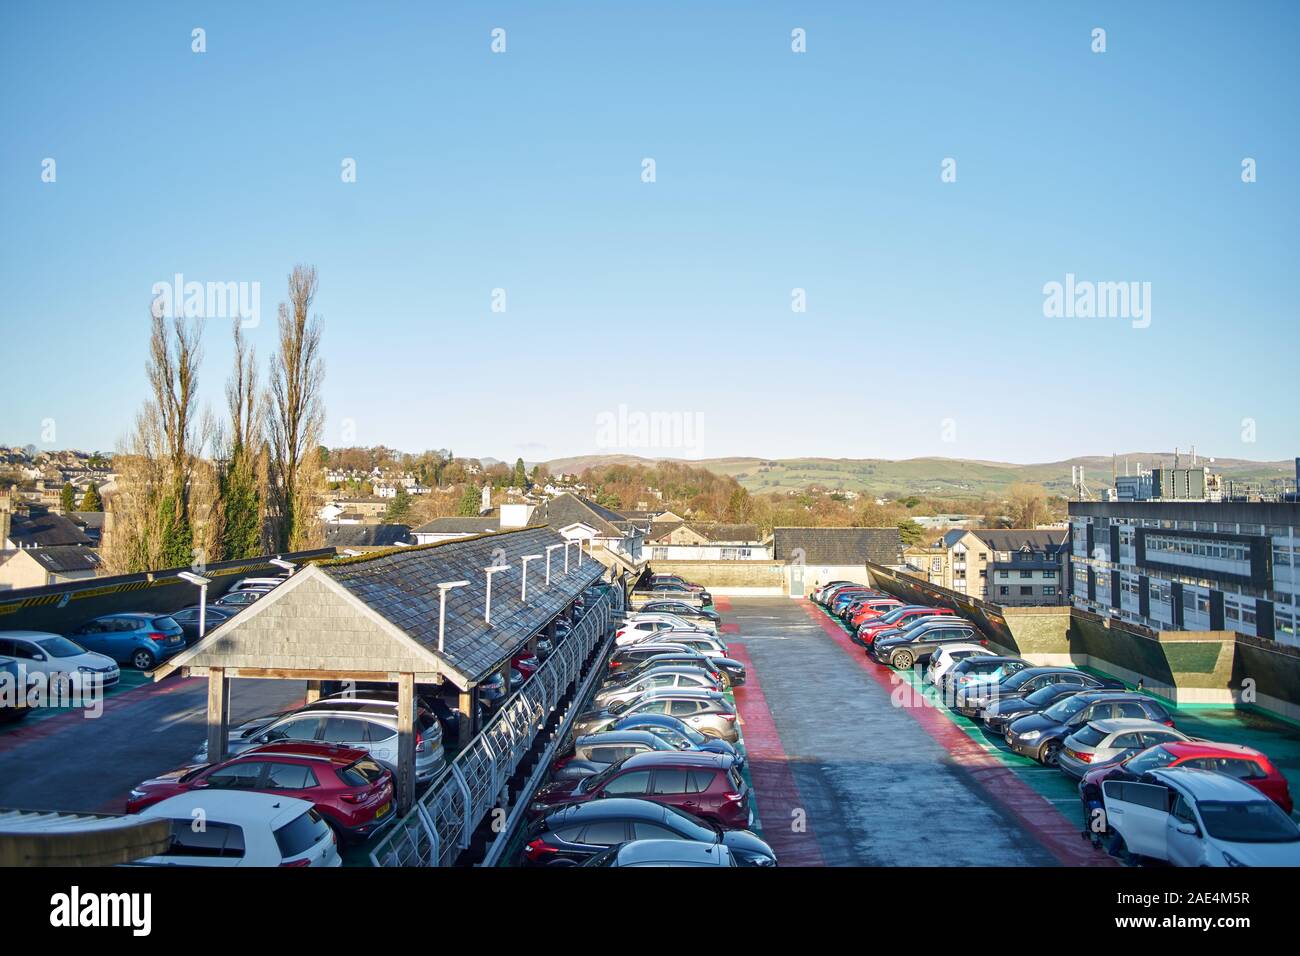 View across the top deck of a multi story car park showing hills beyond Stock Photo